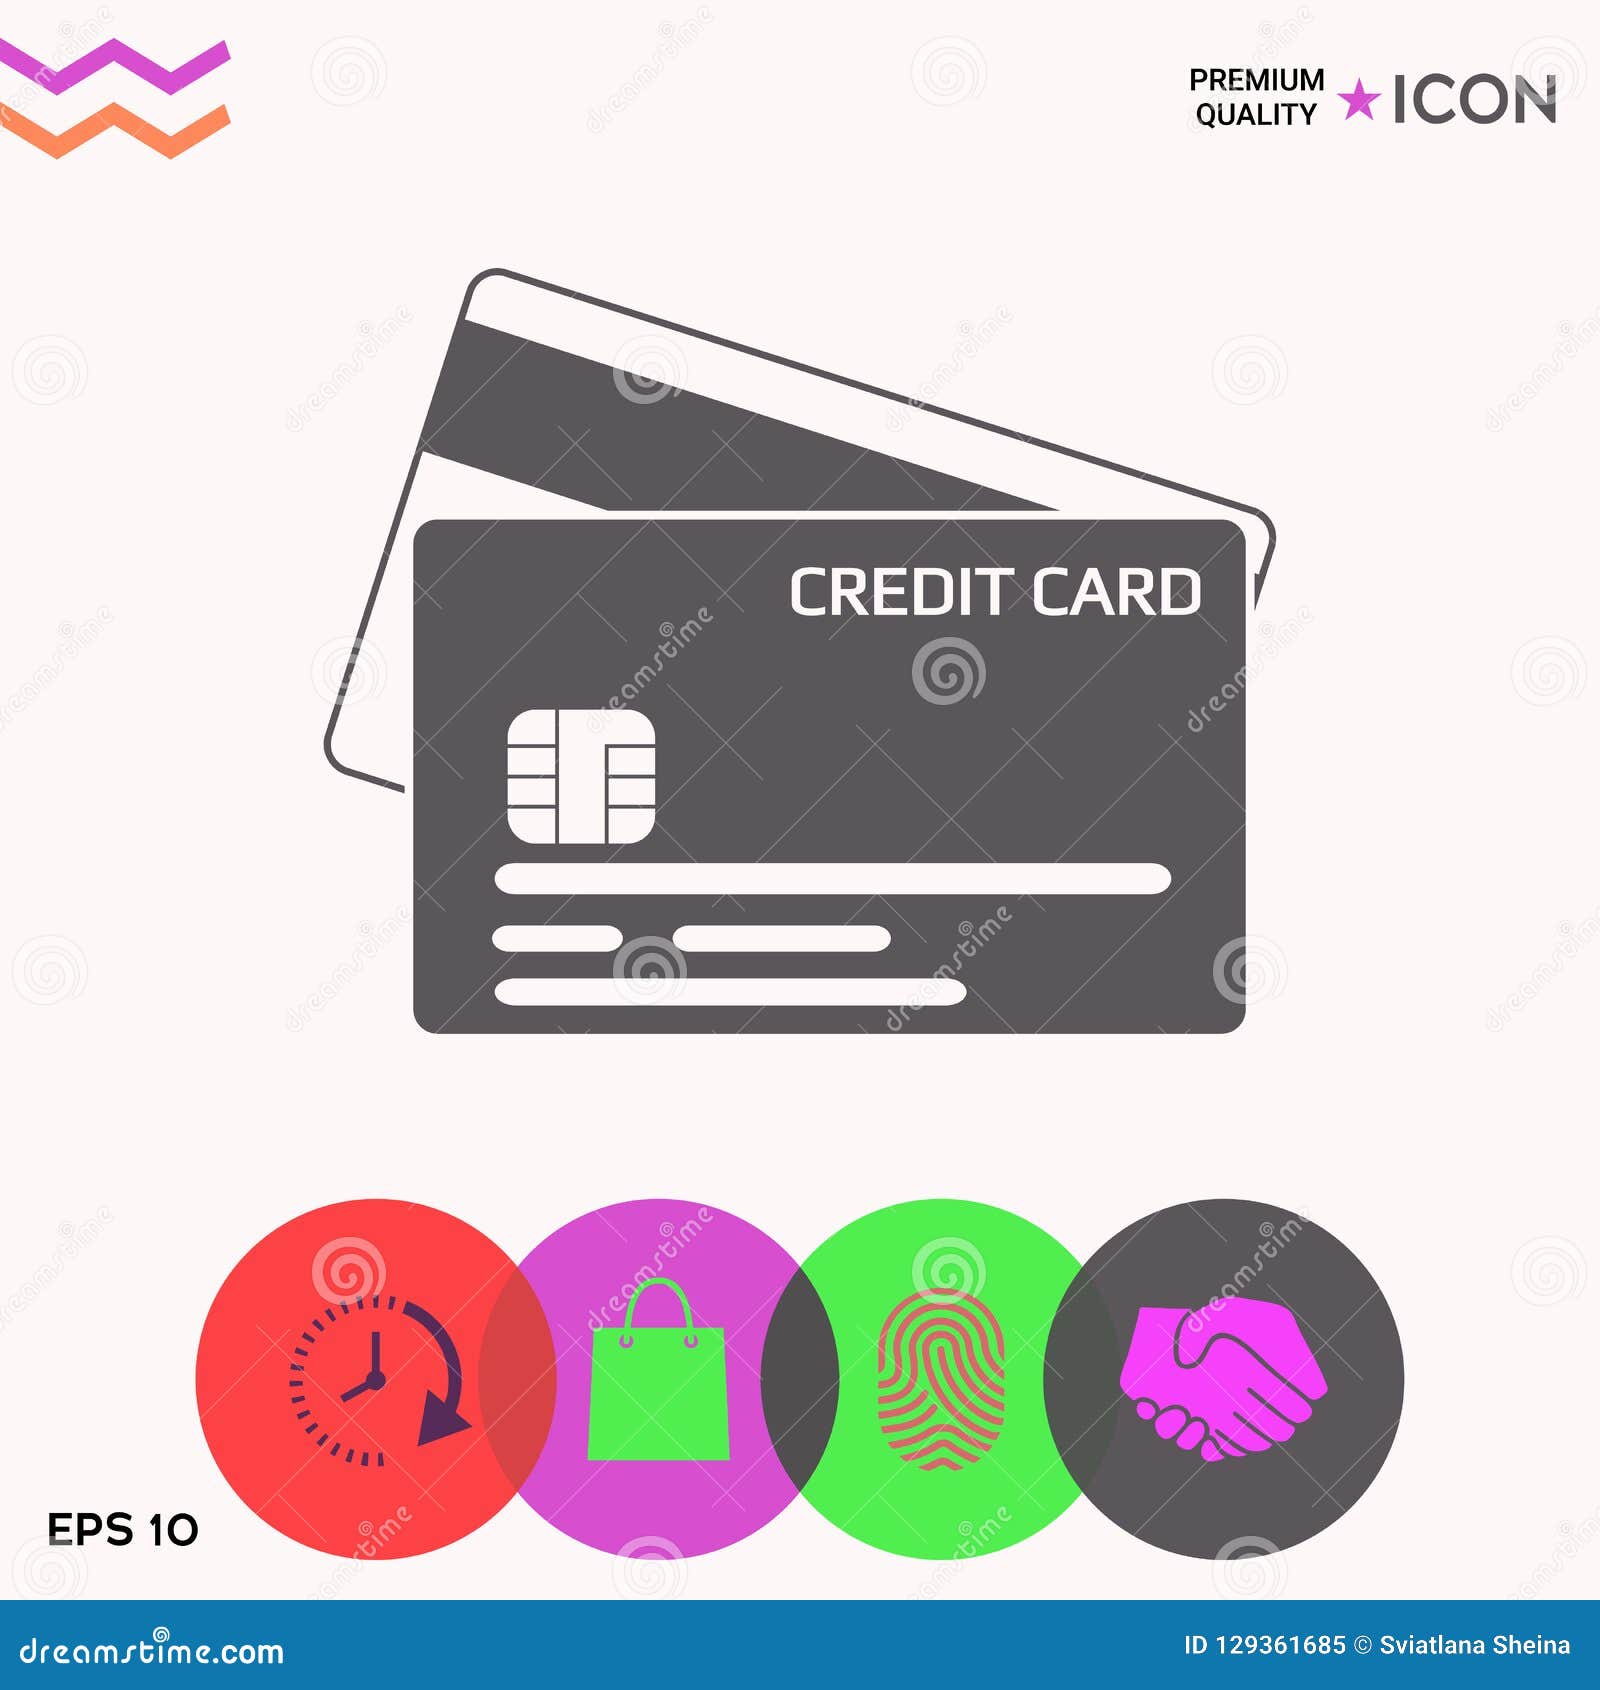 Credit Cards and Magnetic Stripes